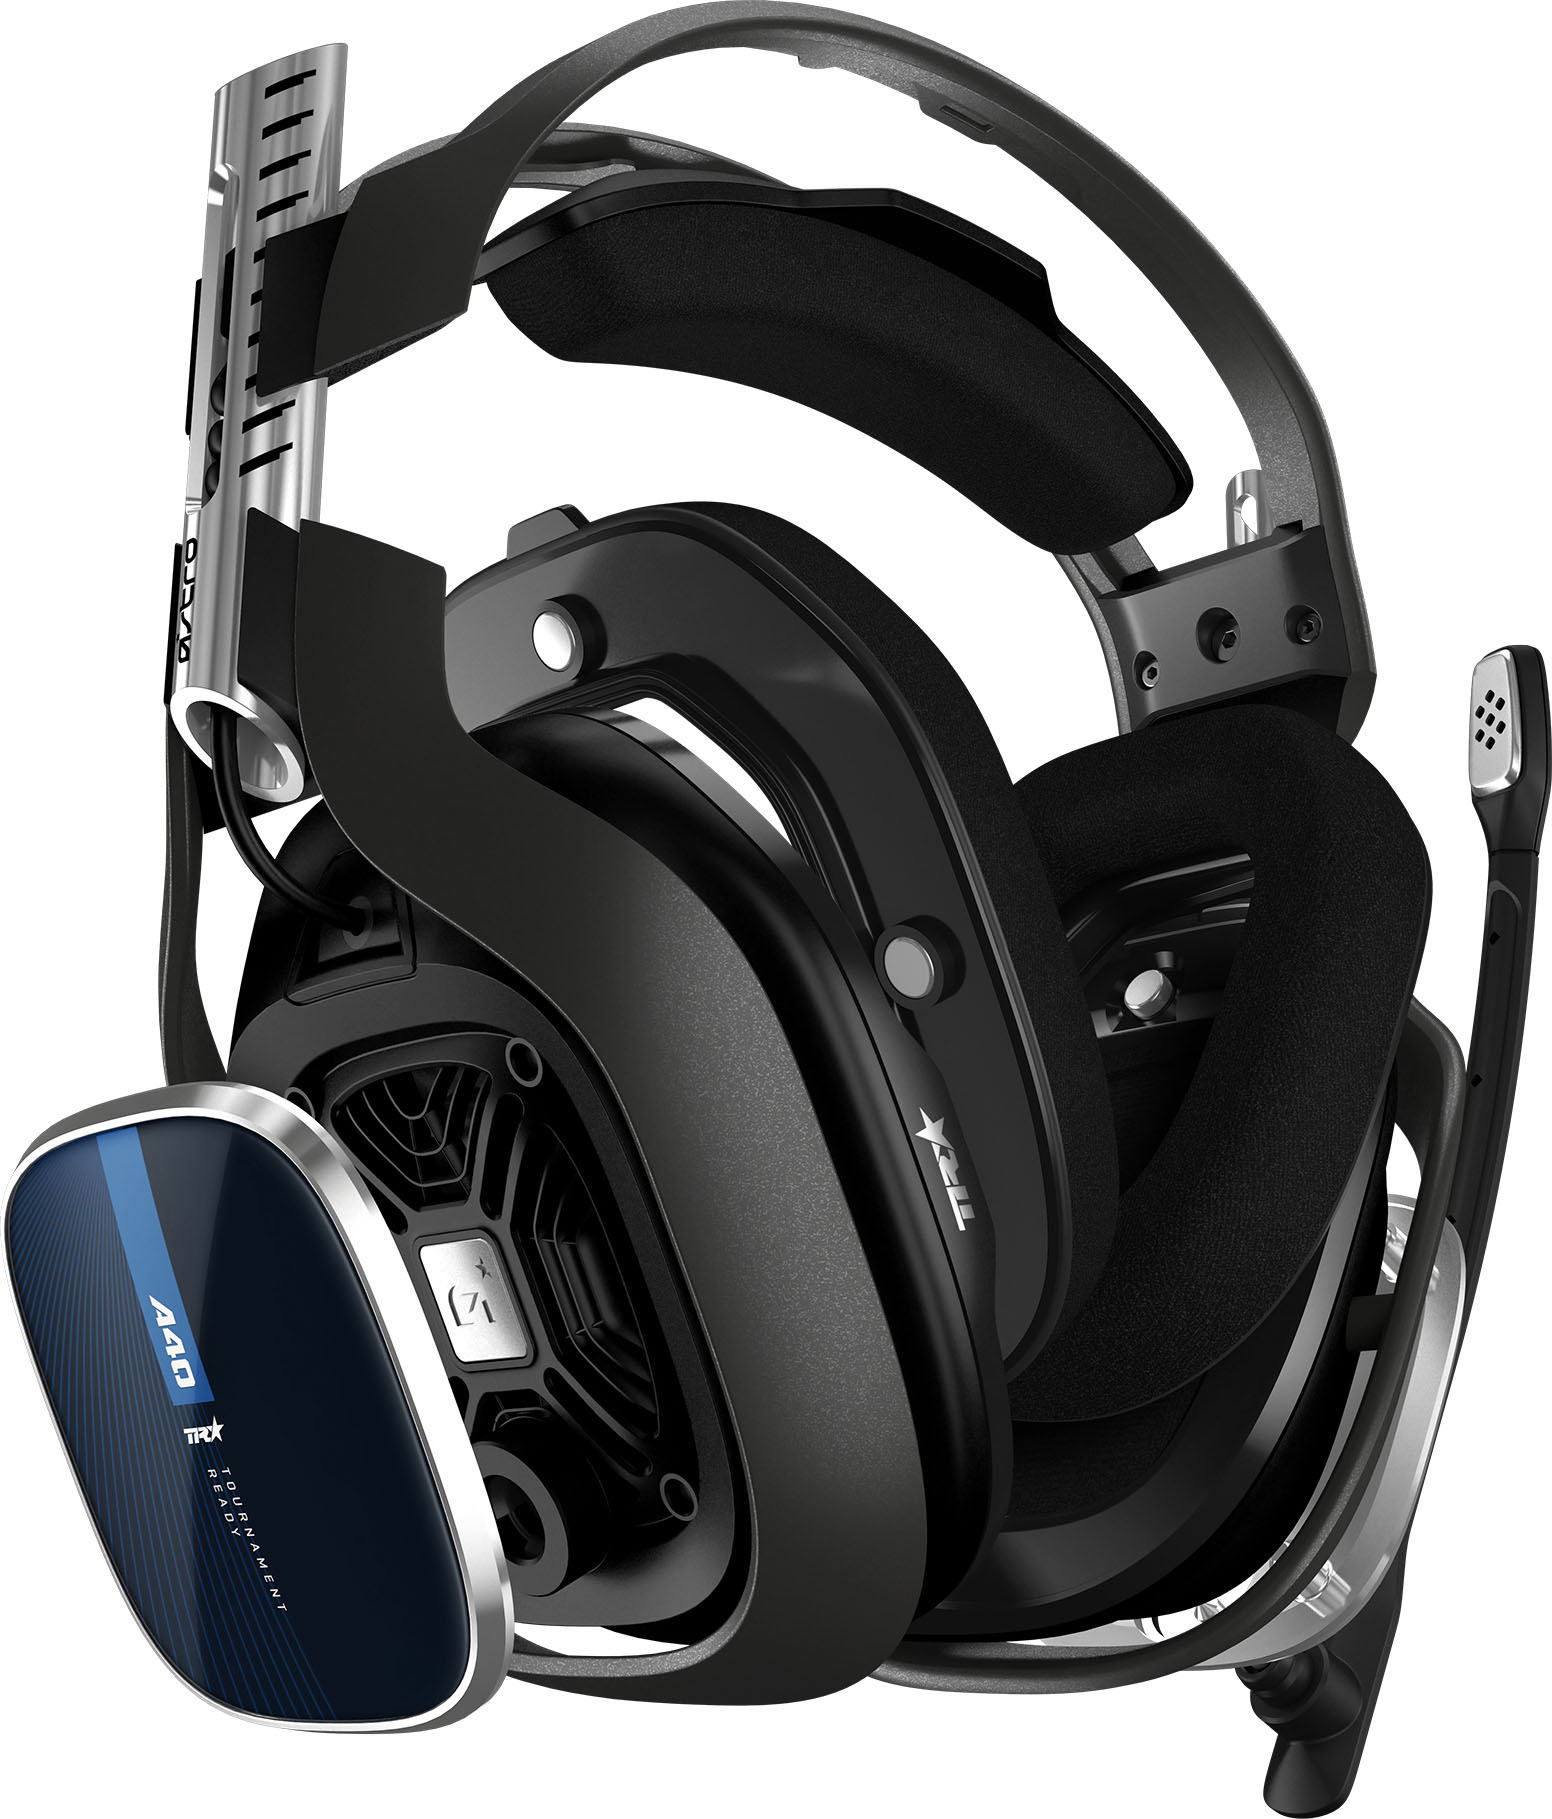 astro headset ps4 a40